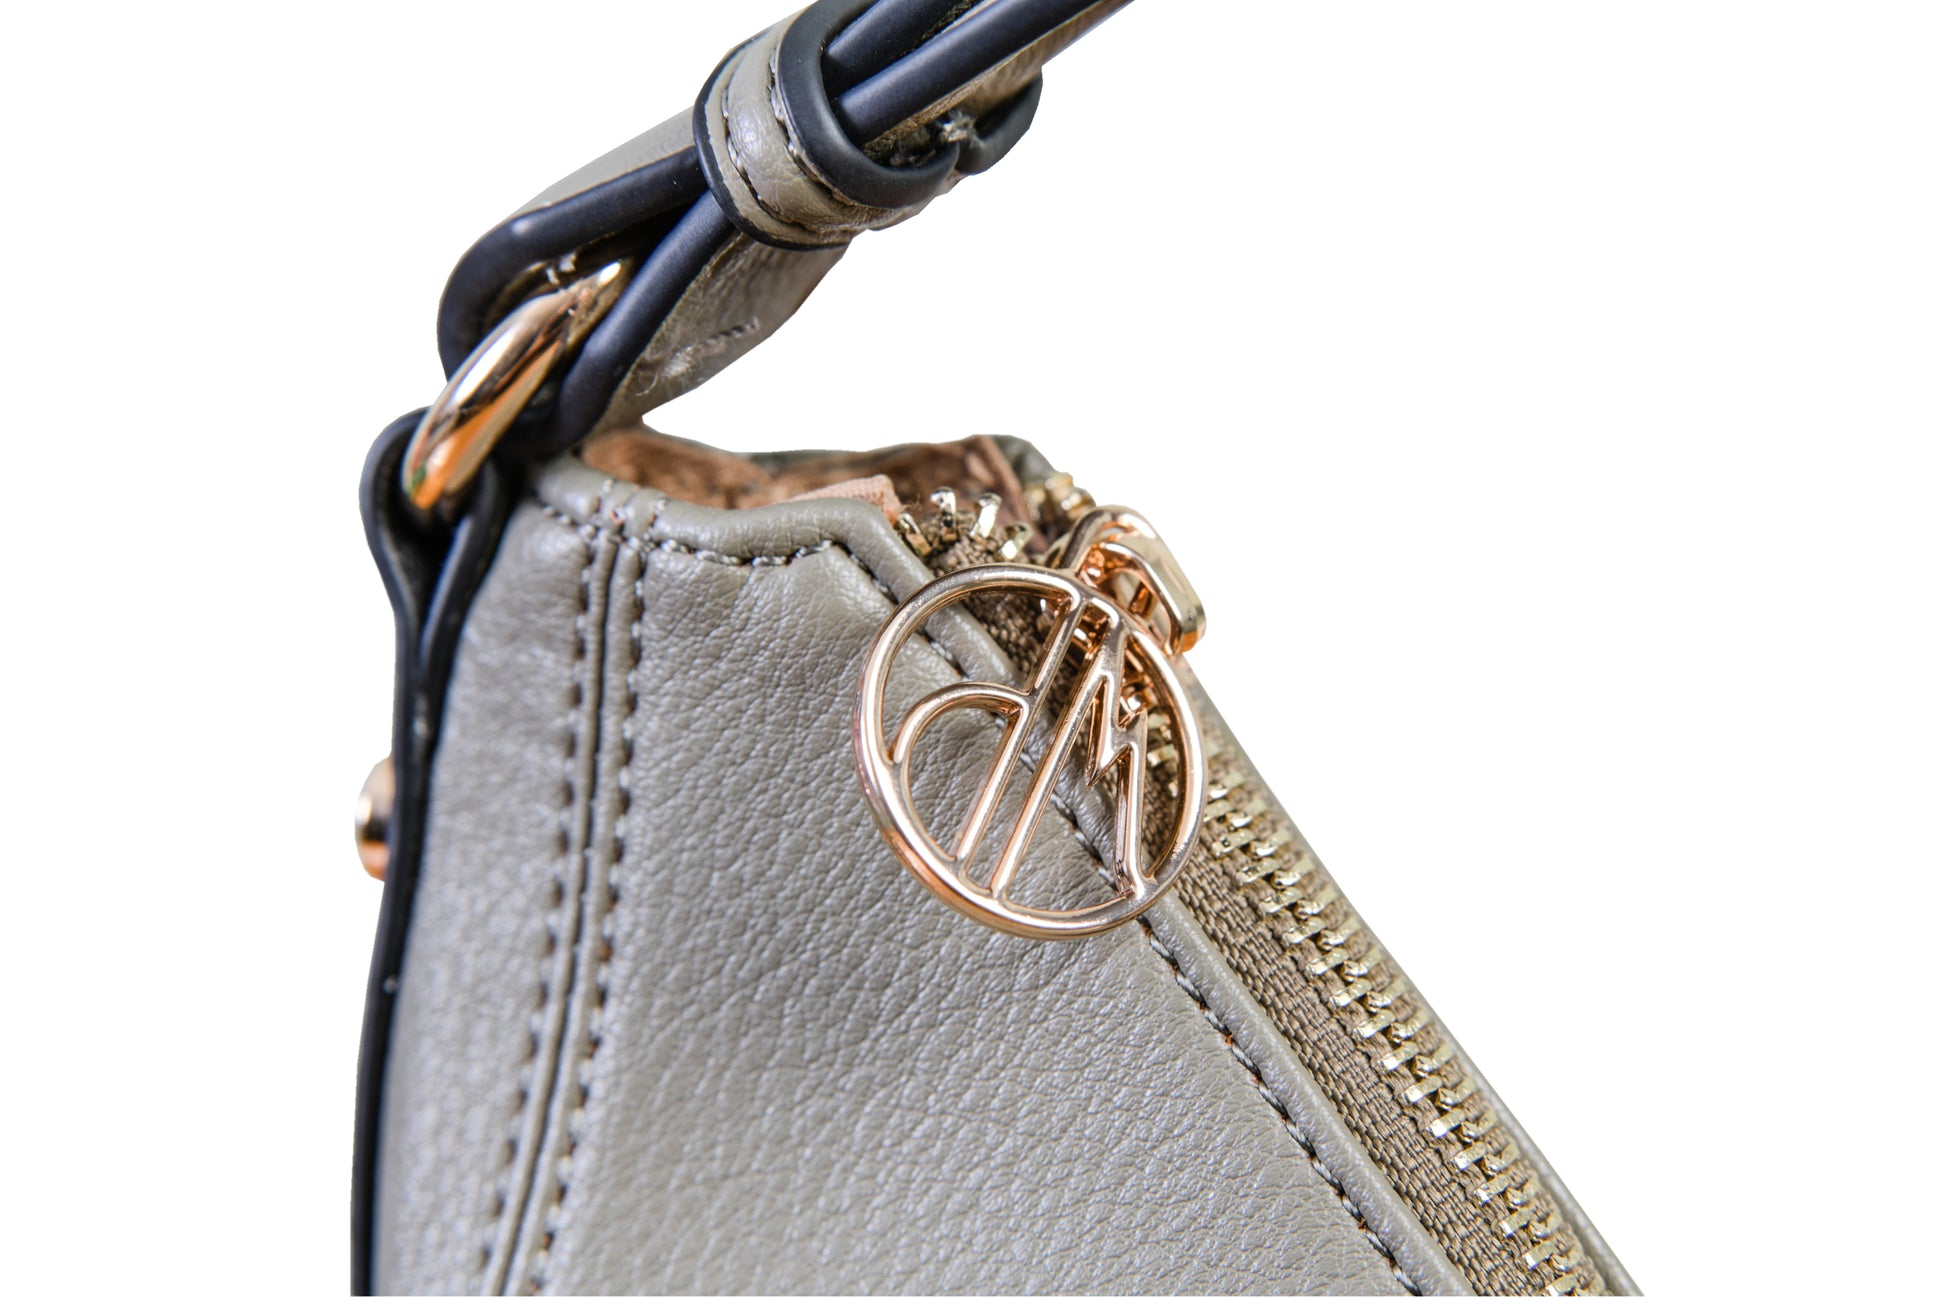 Luna Gray Crescent Pebble Grain Faux Leather Handbag made by Dewi Maya gold zipper pull available at the best boutique in Upstate South Carolina Spartanburg Greenville Dewi Maya Boutique